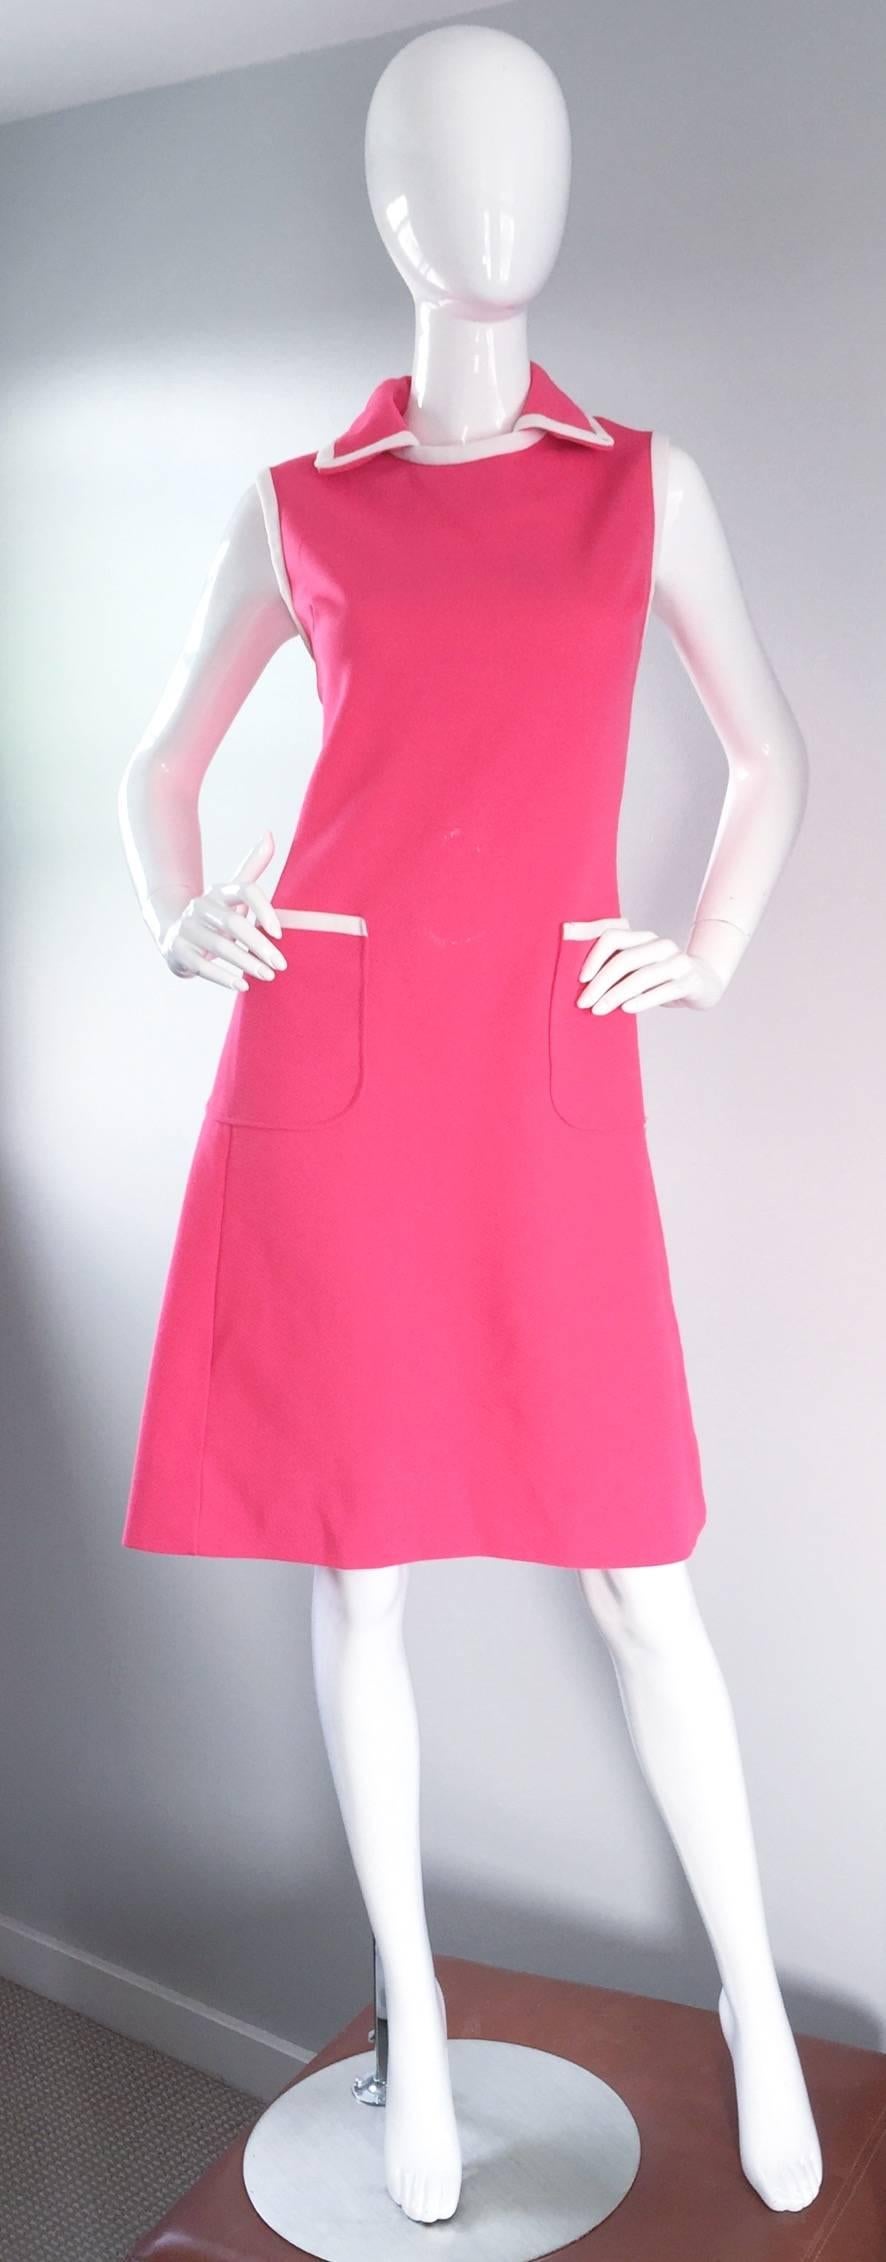 Plus Size Chic Vintage 1960s 60s I. Magnin Hot Pink + White A - Line Knit Dress In Excellent Condition For Sale In San Diego, CA